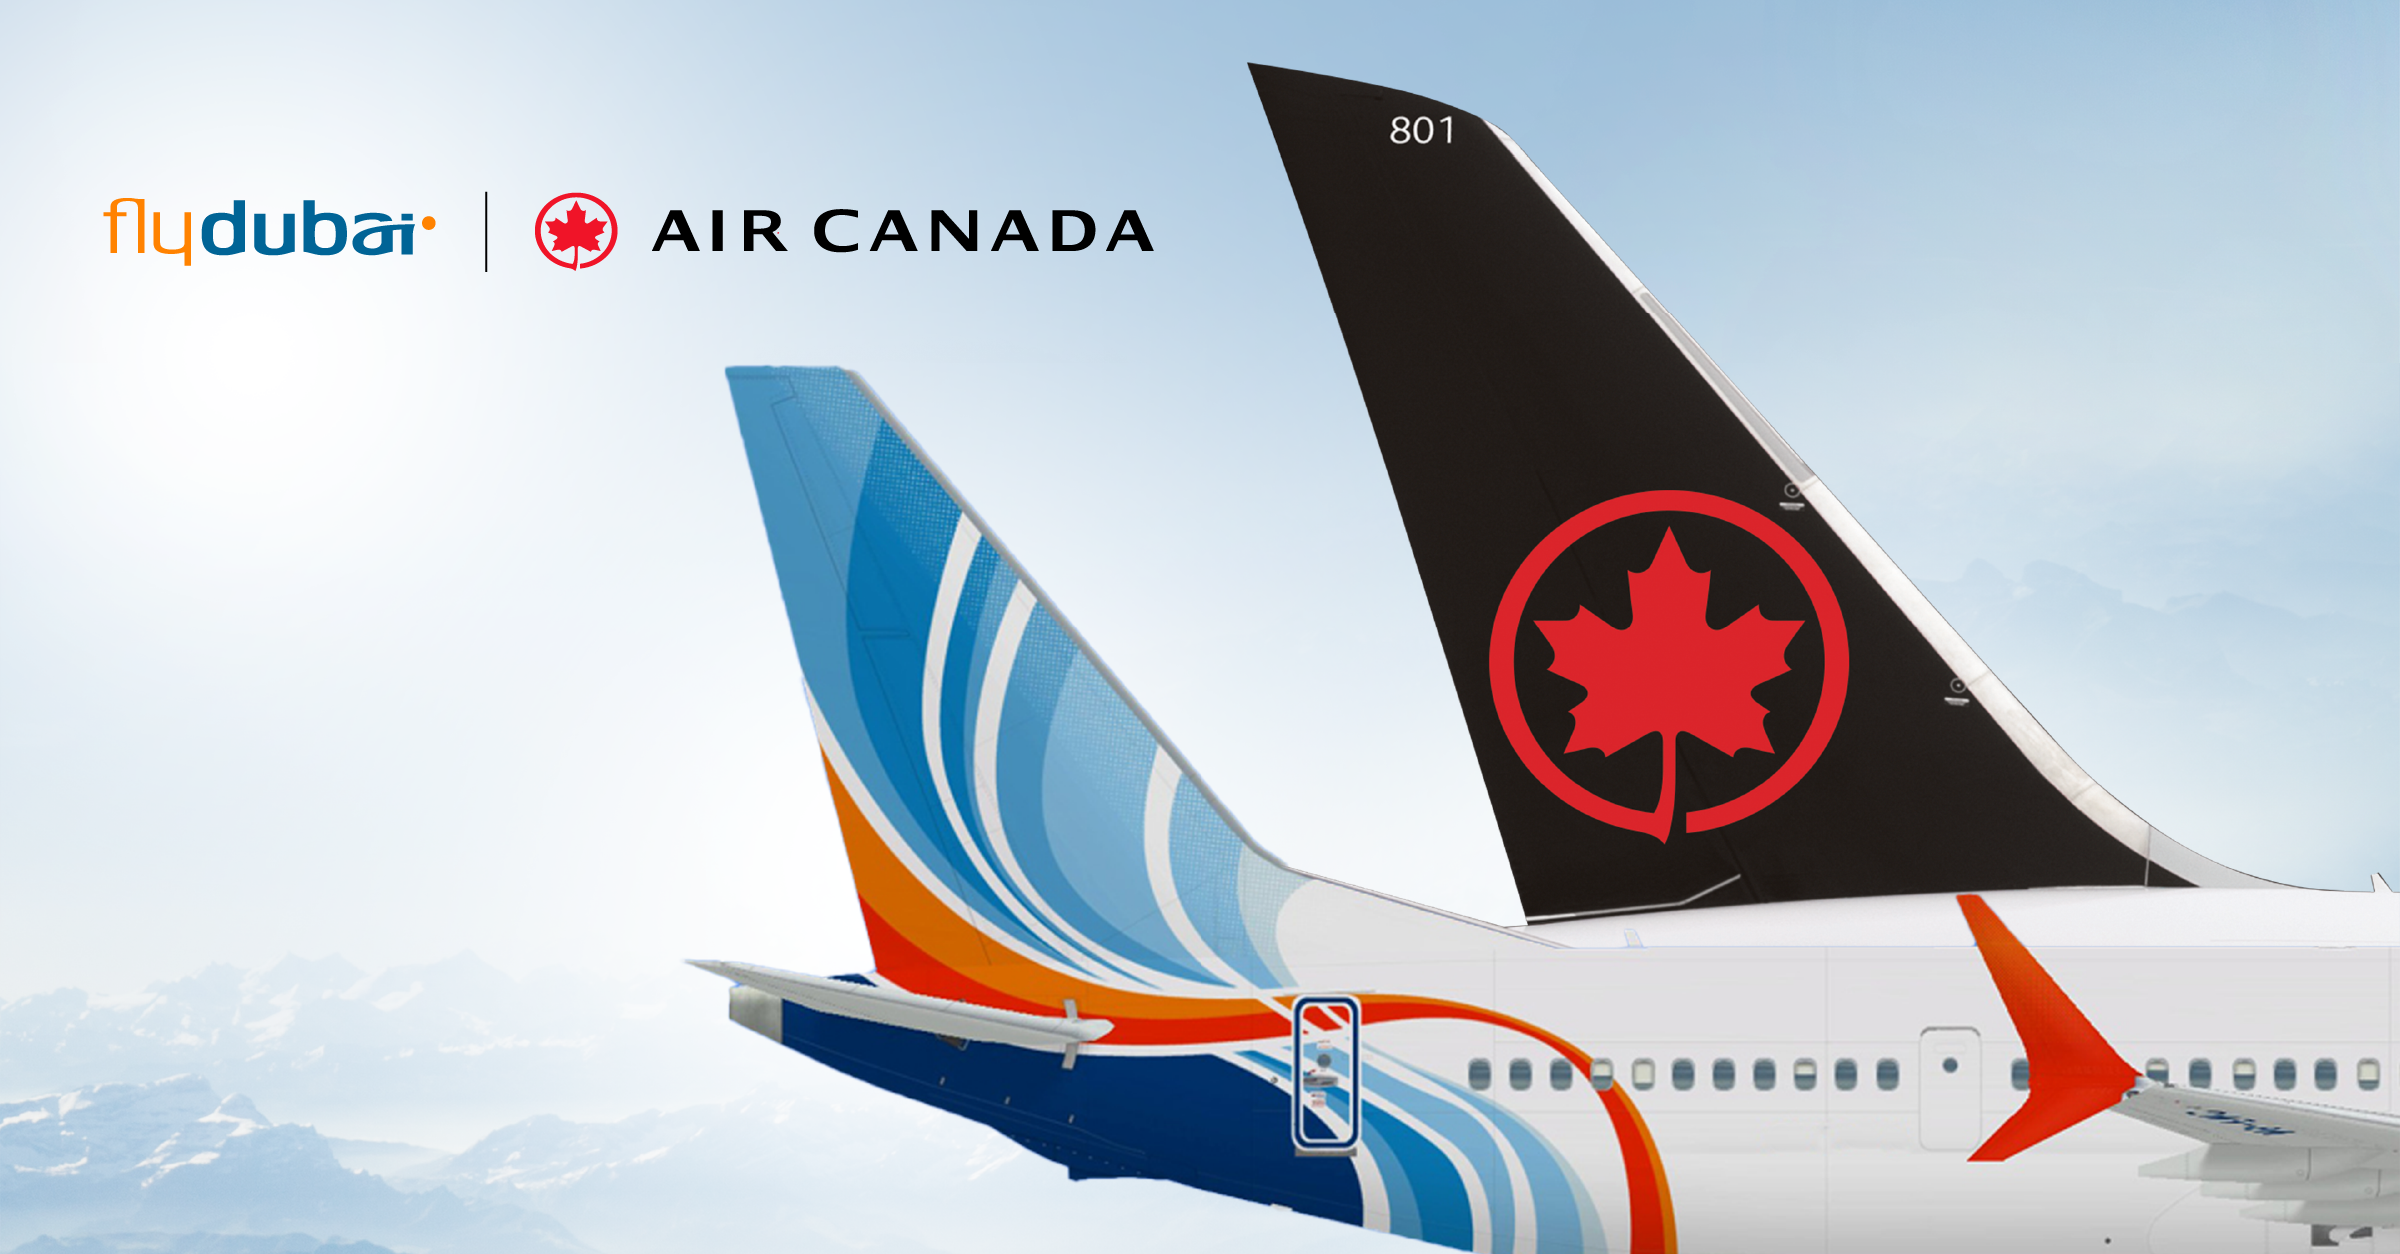 Air Canada and flydubai Join Forces for Seamless Connections in Dubai